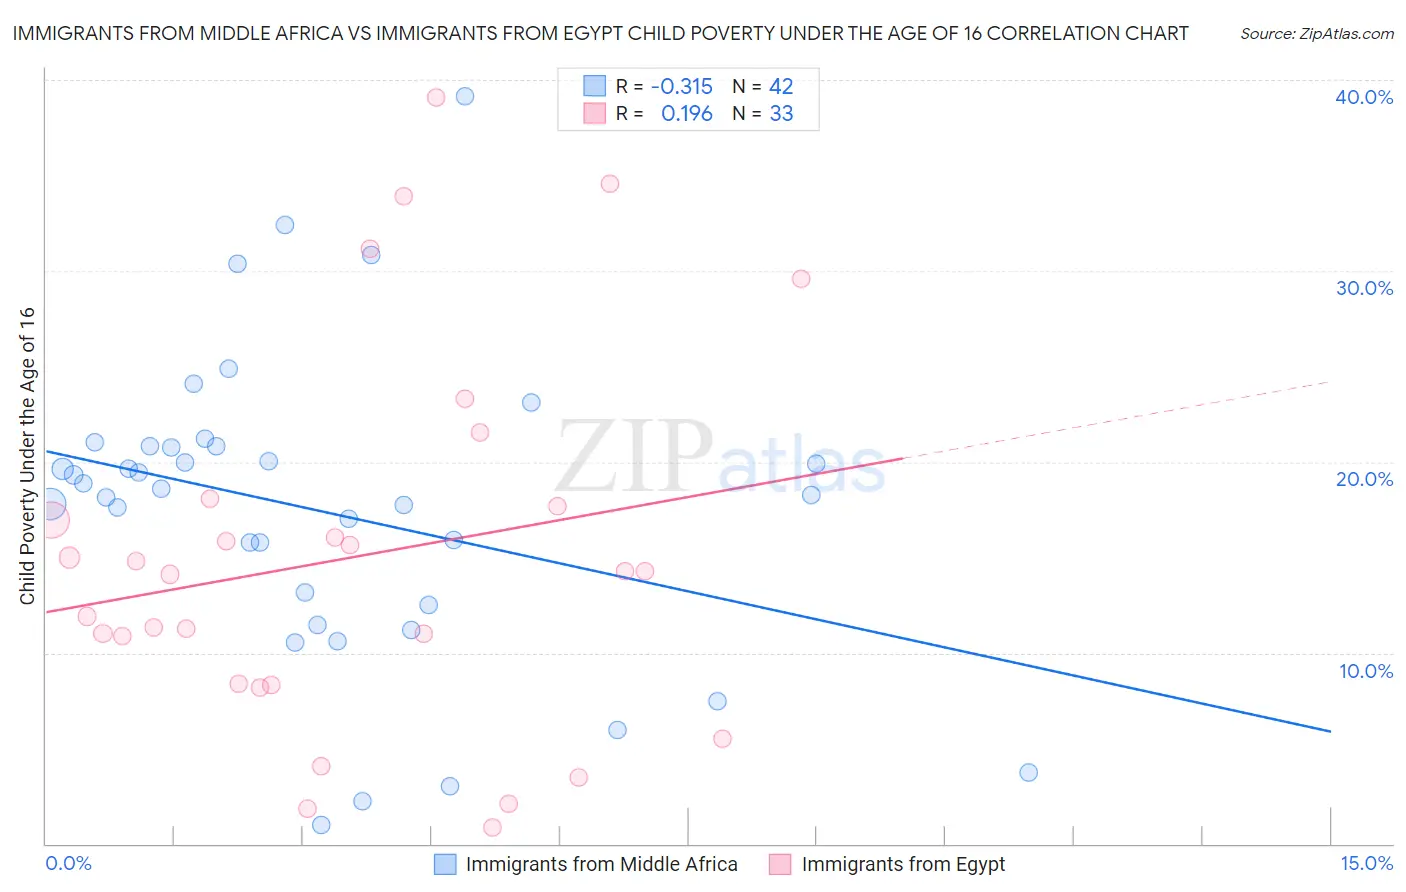 Immigrants from Middle Africa vs Immigrants from Egypt Child Poverty Under the Age of 16